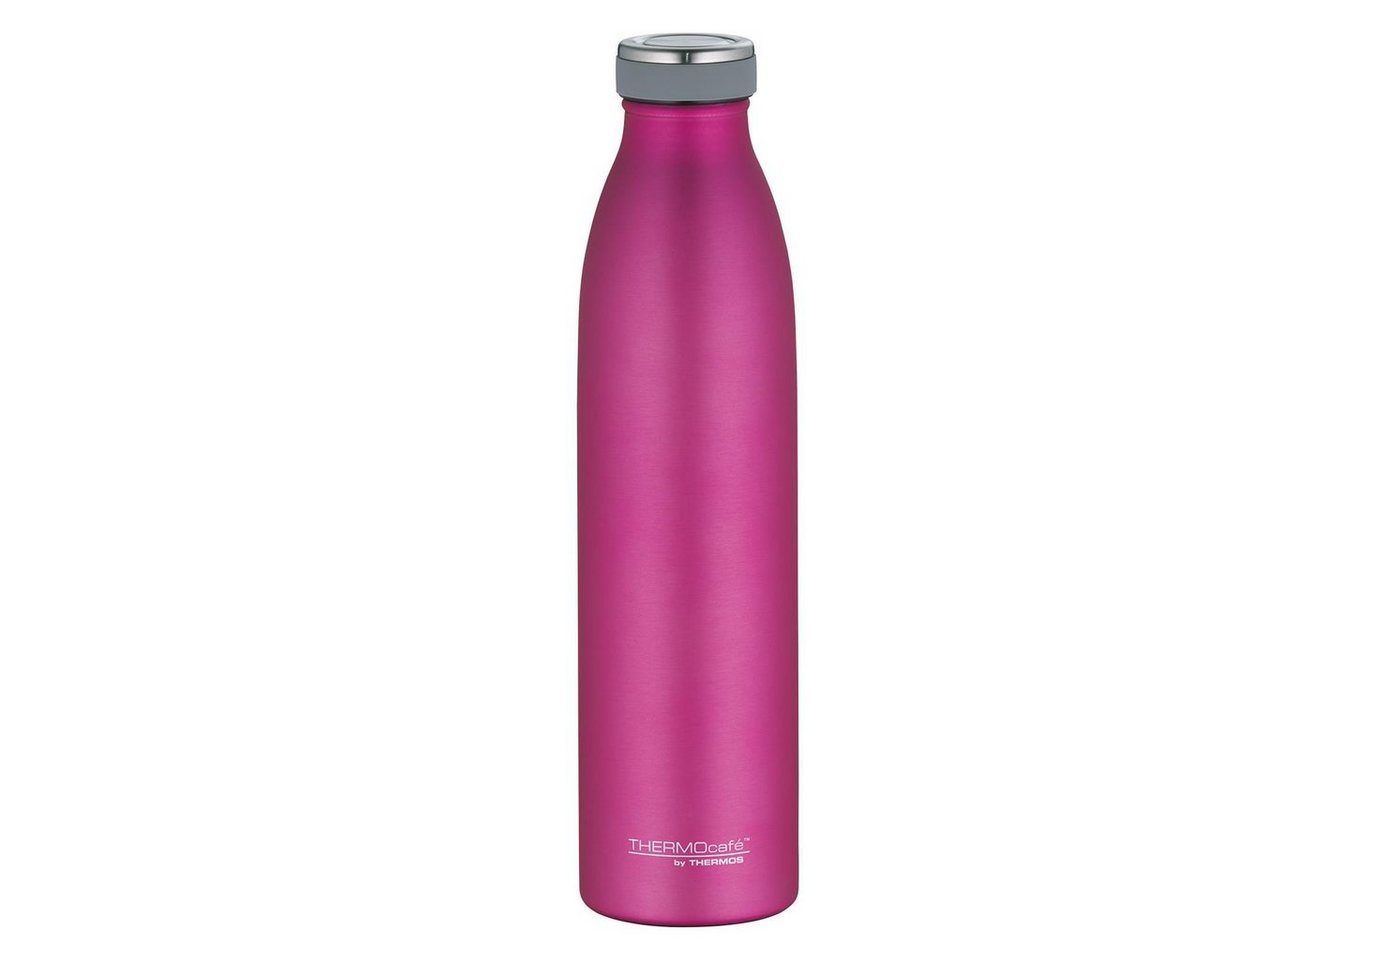 THERMOS Isolierflasche TC Bottle Thermosflasche Pink Matt 0,75 Liter Isolierflasche von THERMOS